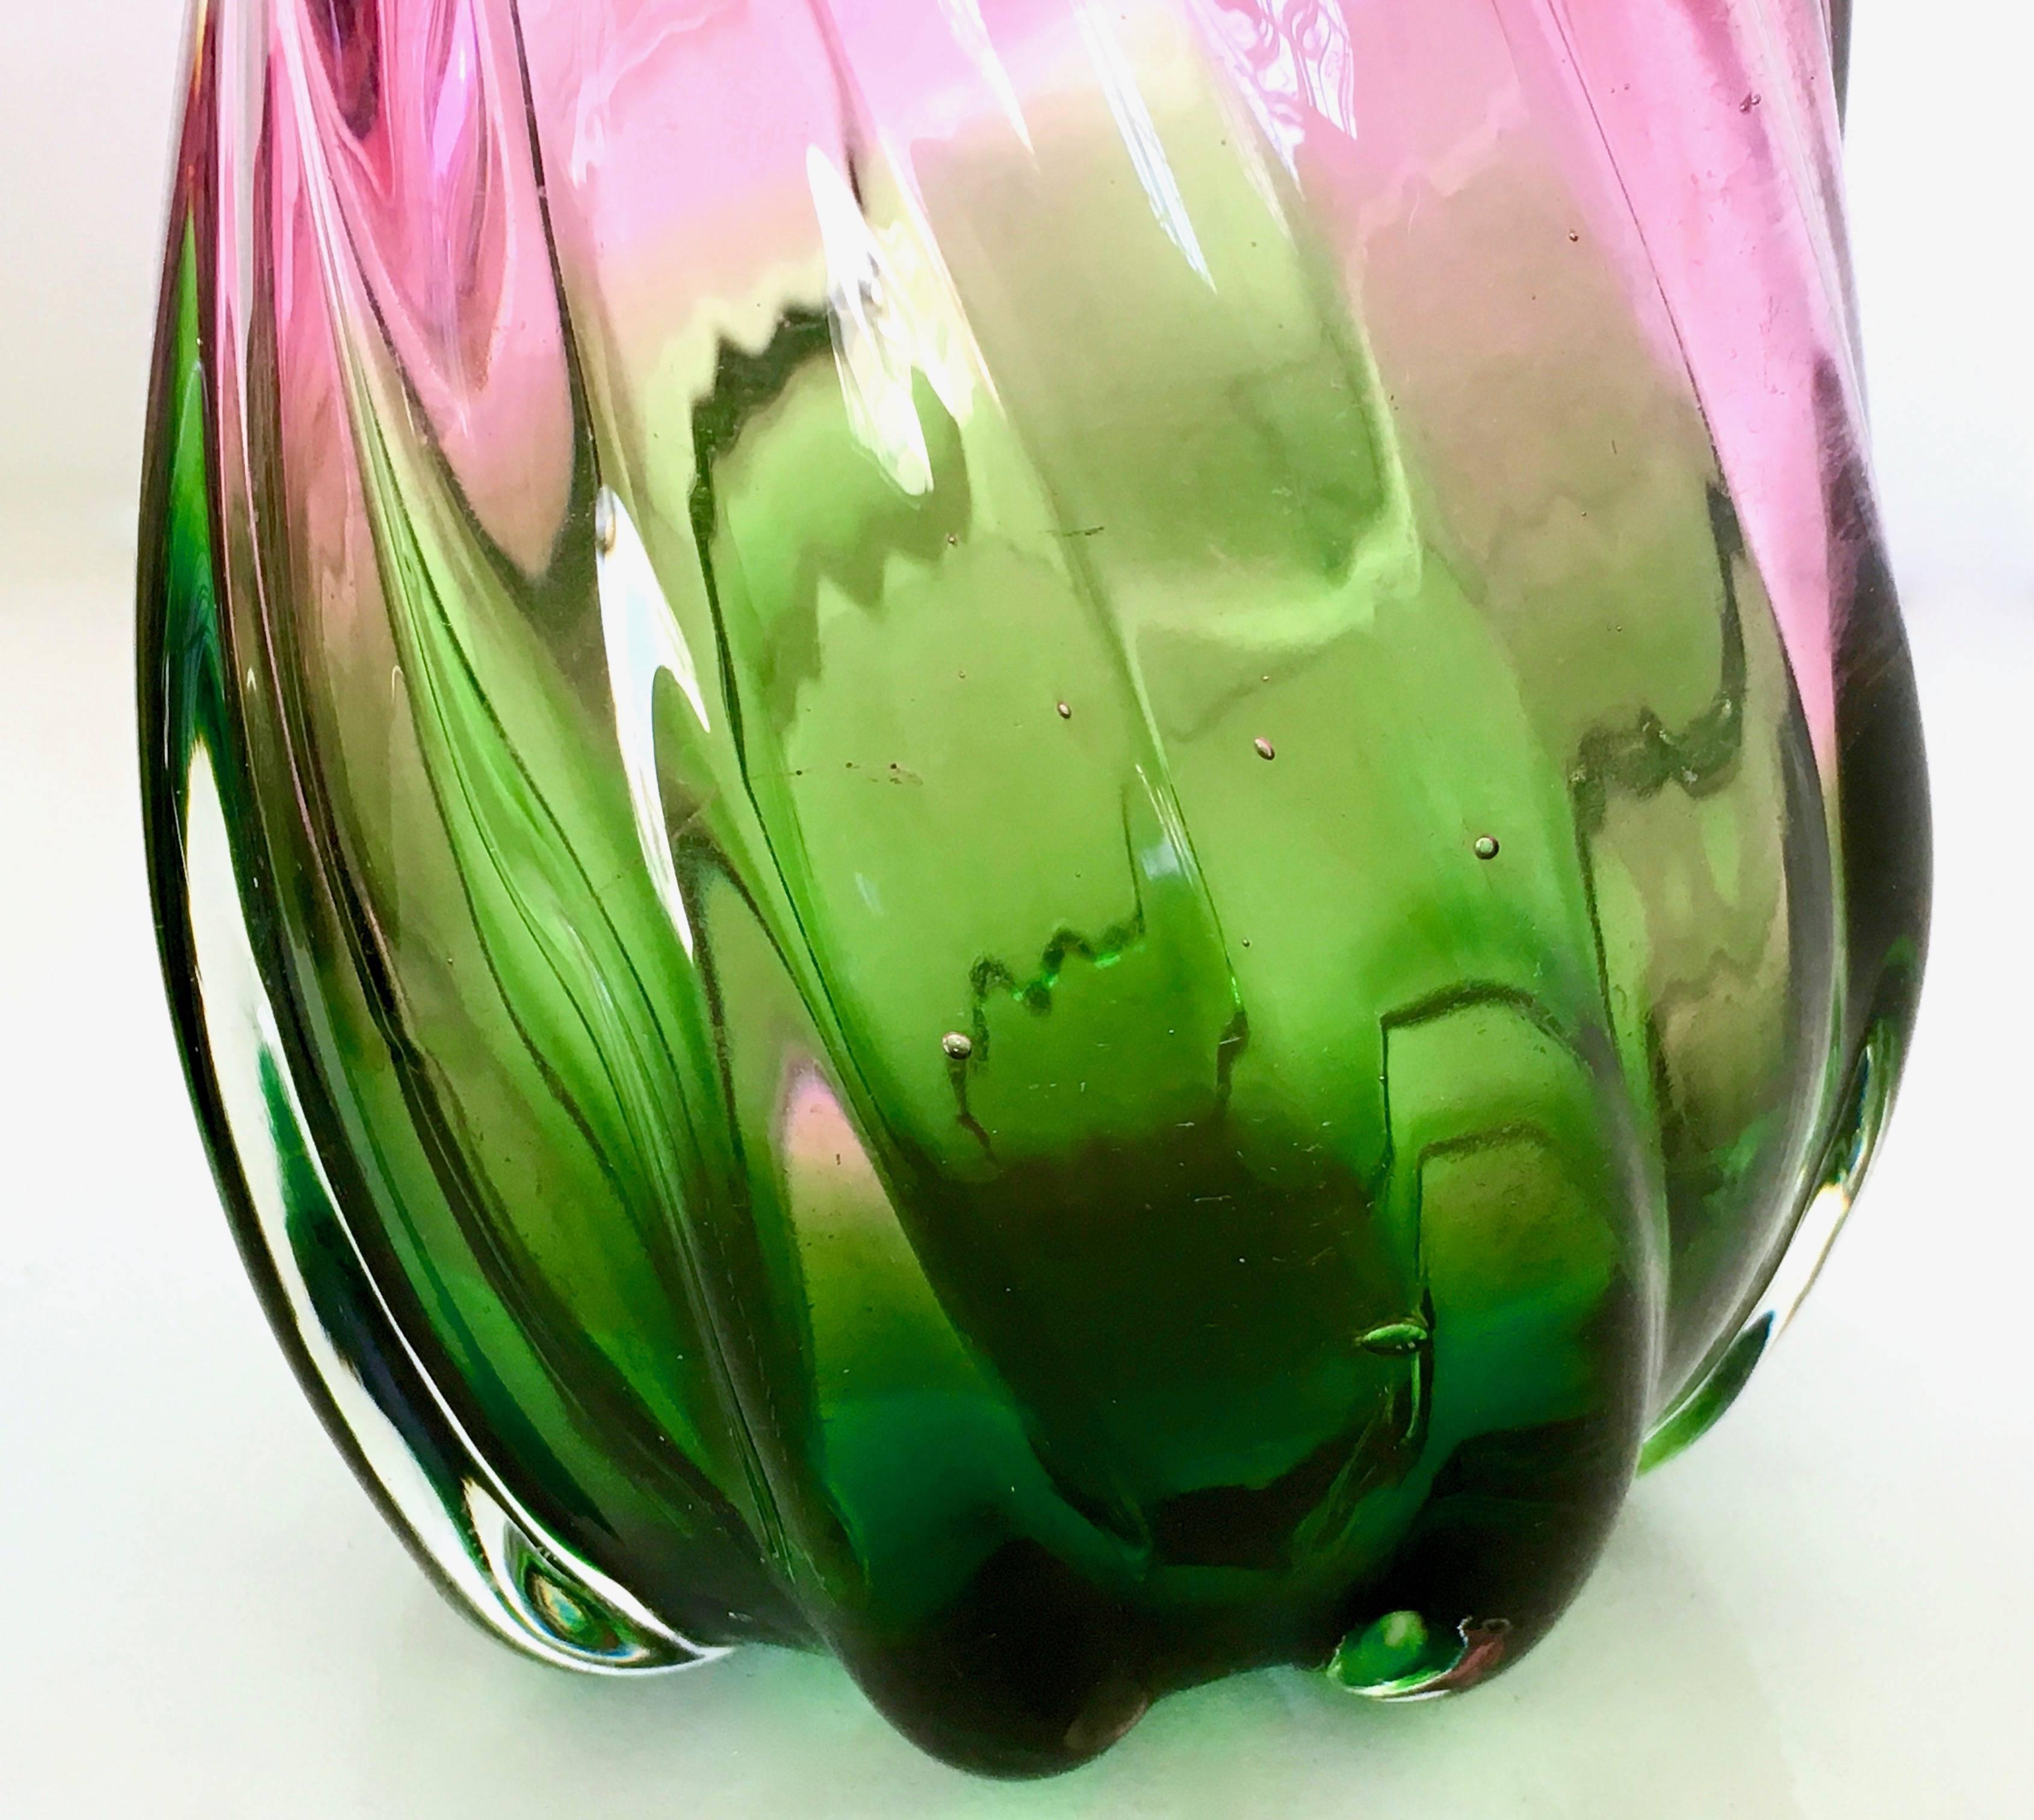 Blown Glass Pair of Murano Glass Vases Ascribable to Vetreria Toso, Italy, 1950s